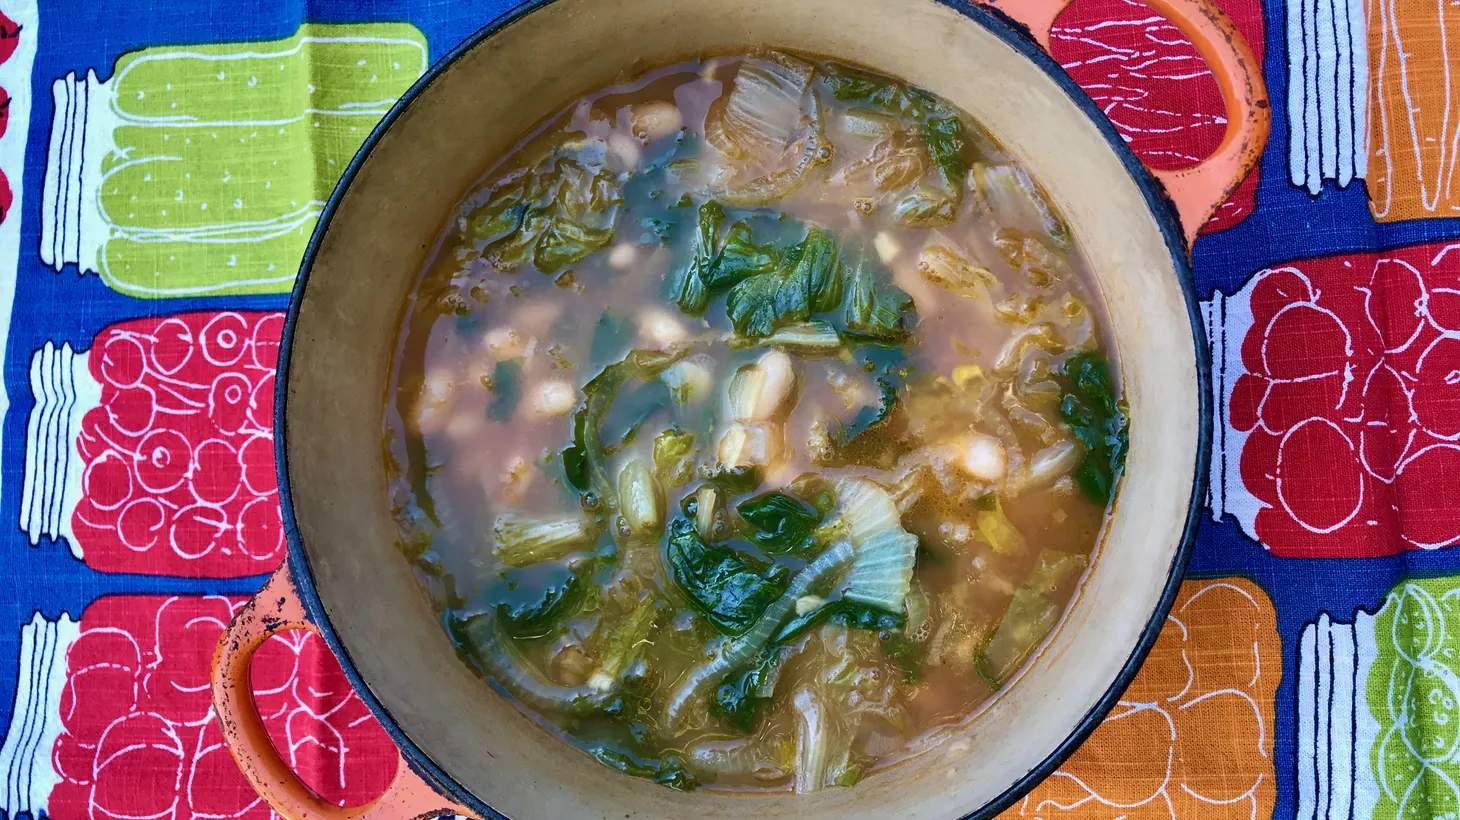 Minestra di Scarole e Fagioli, which includes escarole and white beans, is an easy and comforting Italian soup.